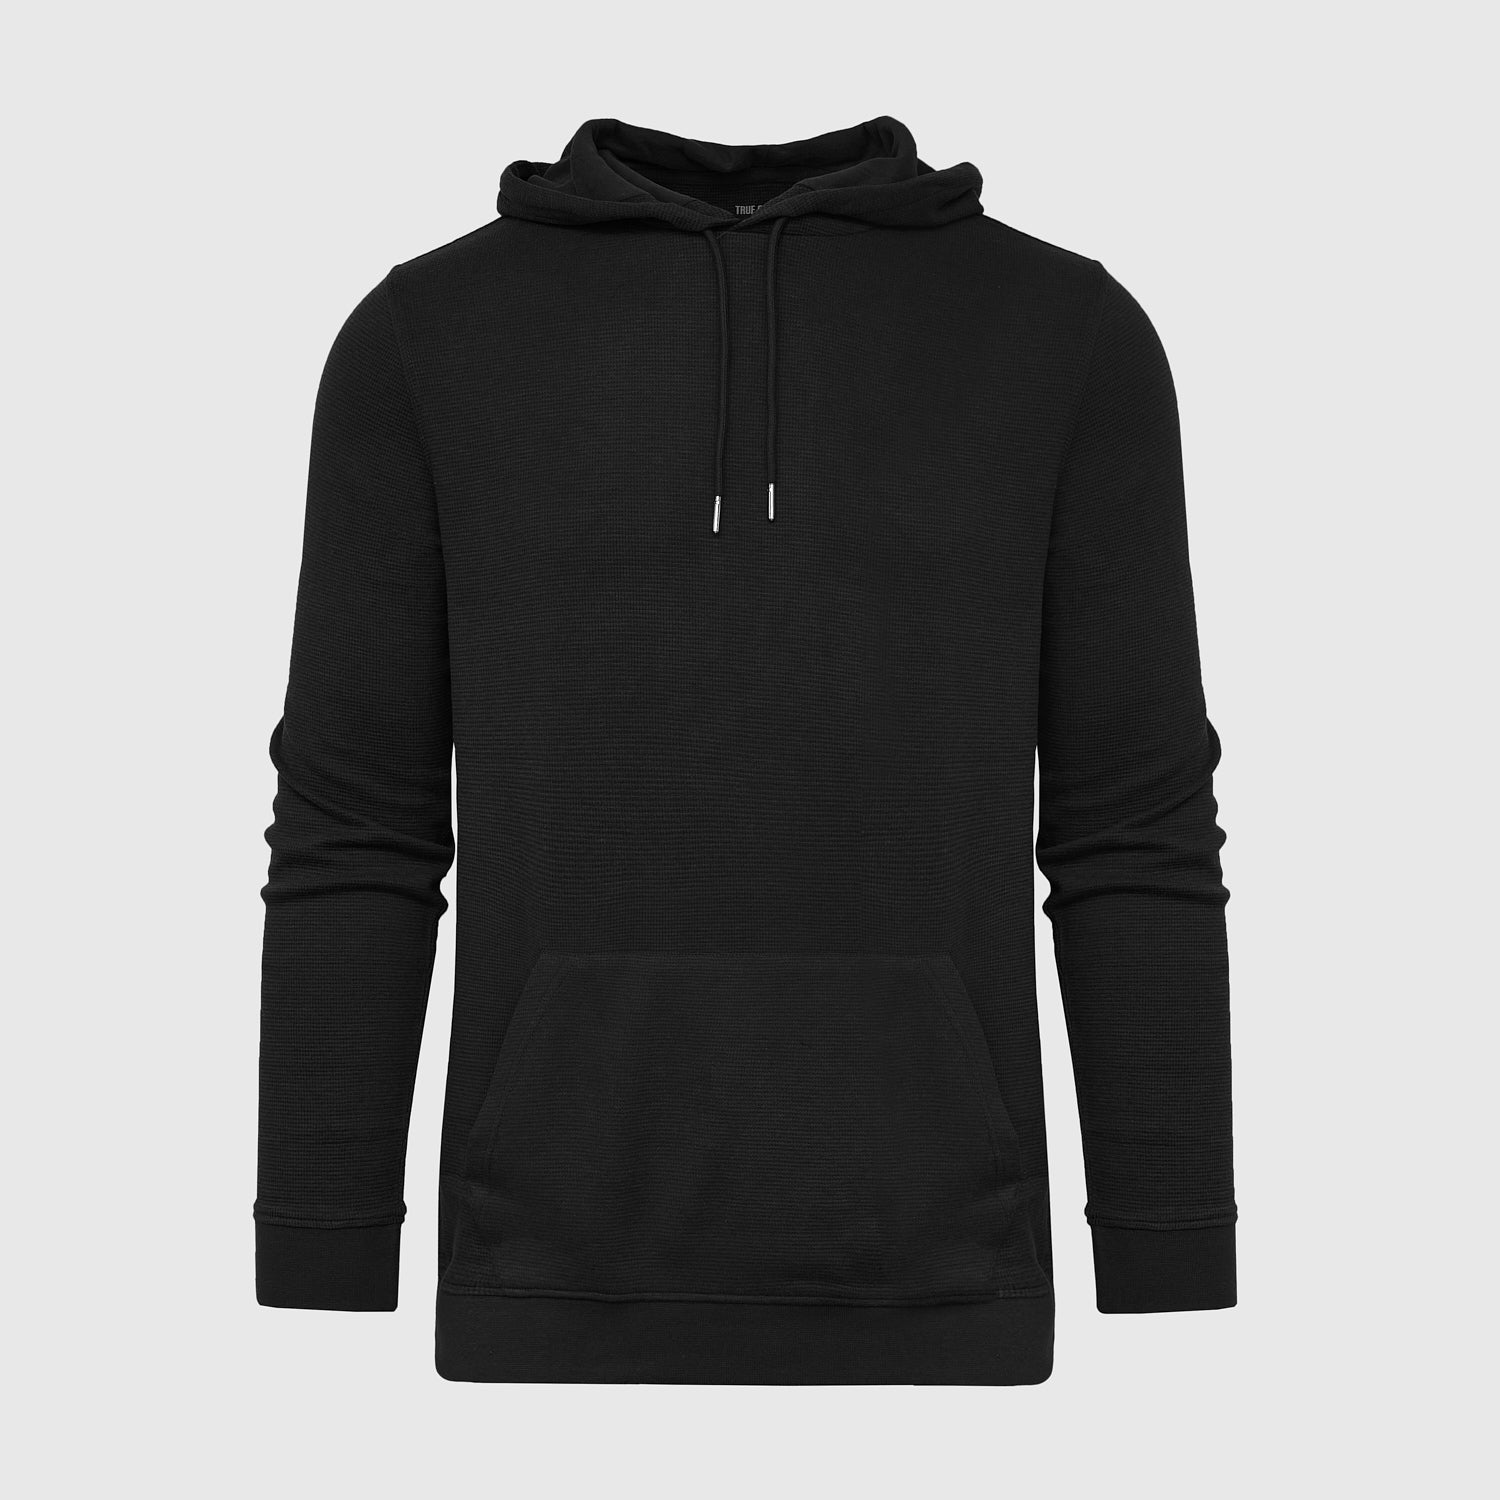 Black Pull Over Hoodie - Organic - The Softest Hoodie Ever – West Path